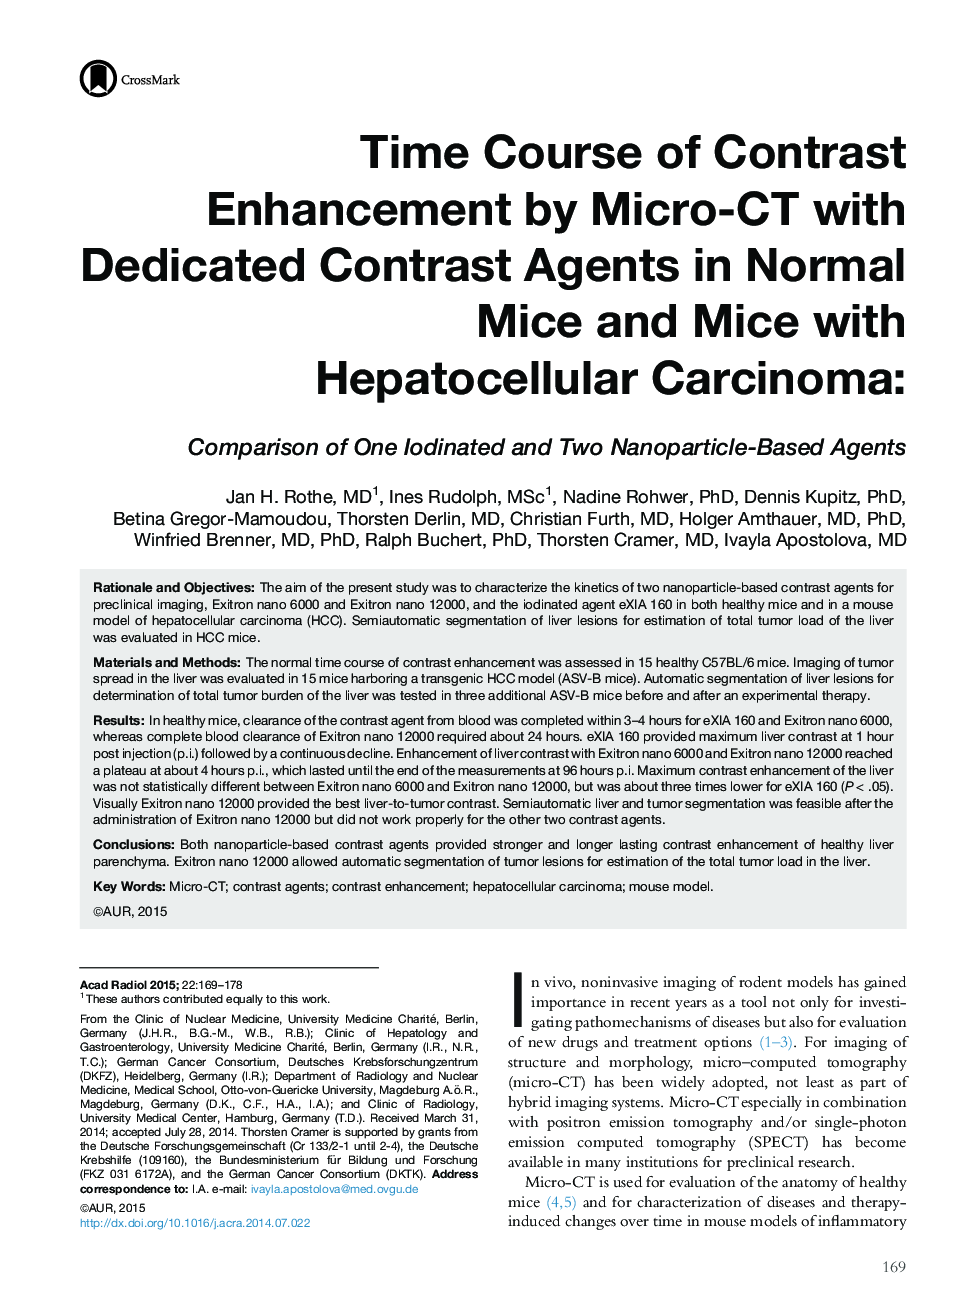 Time Course of Contrast Enhancement by Micro-CT with Dedicated Contrast Agents in Normal Mice and Mice with Hepatocellular Carcinoma